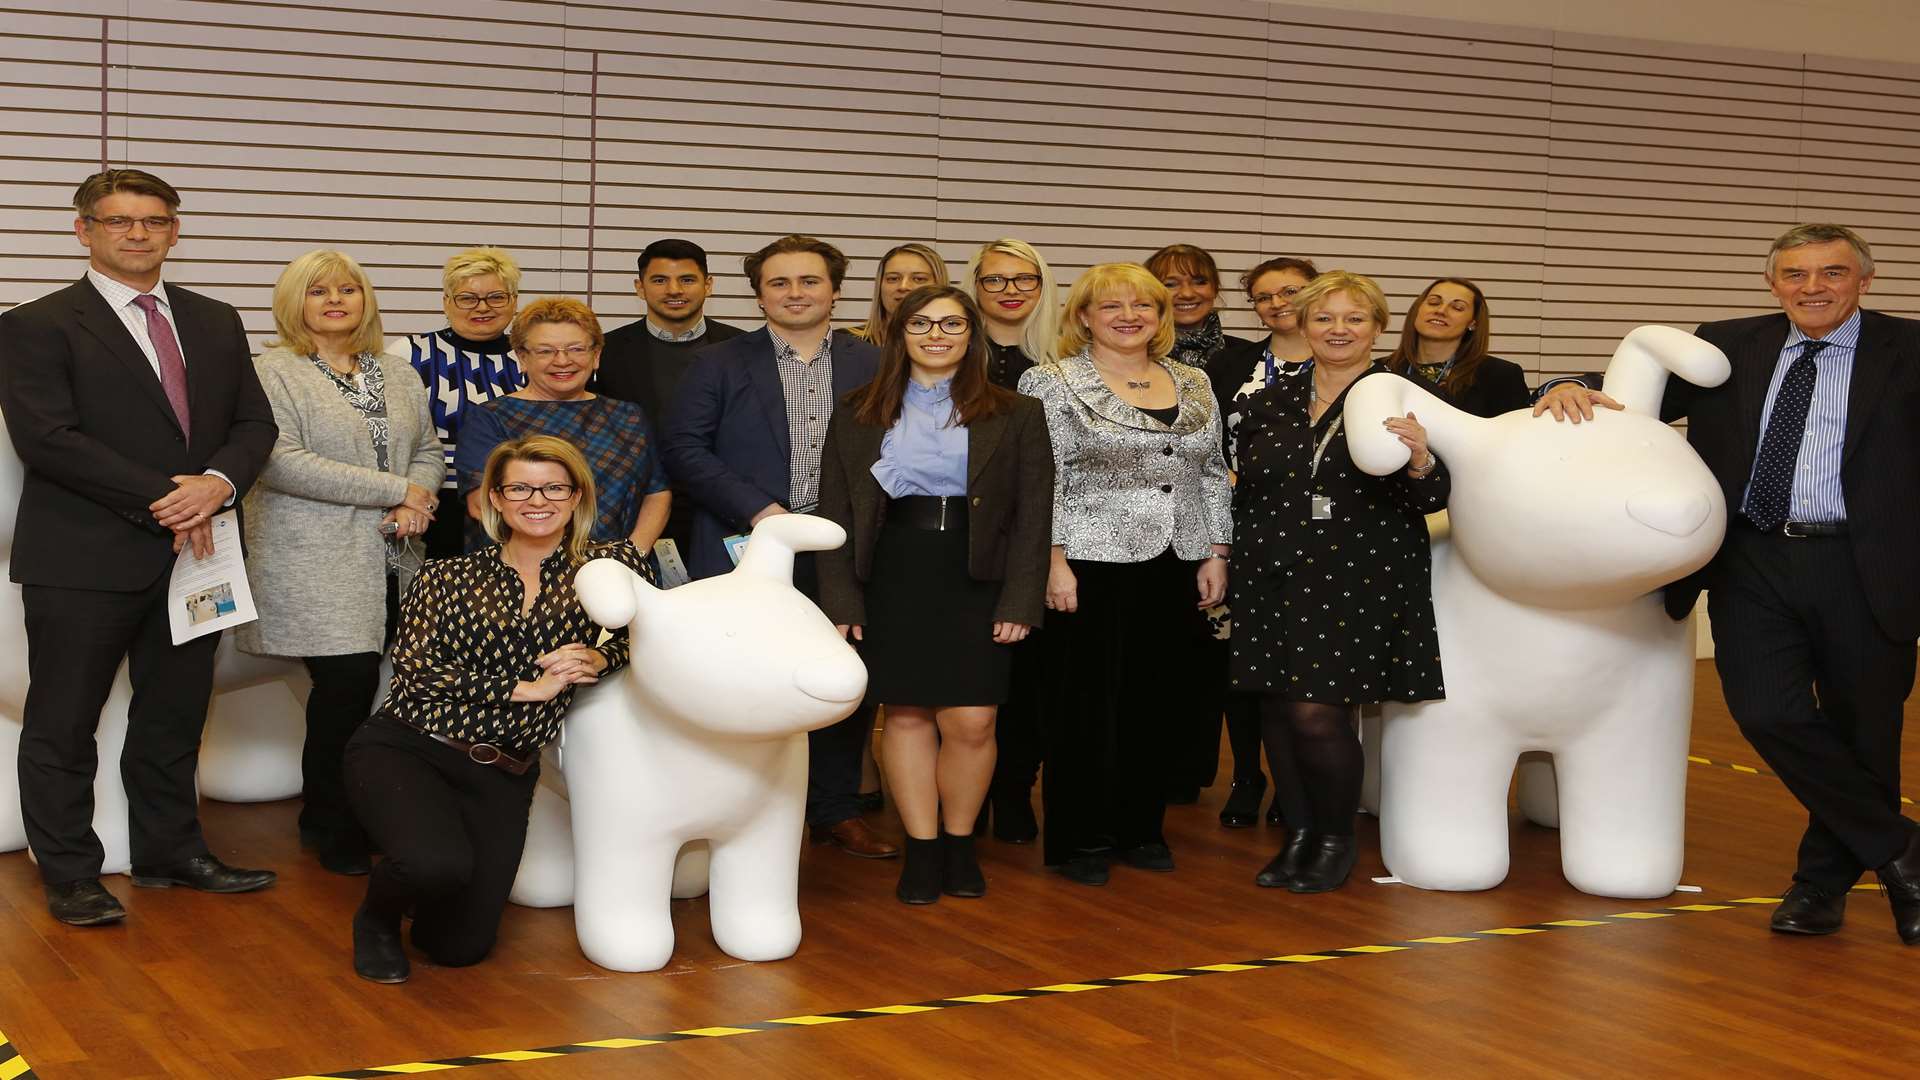 The Snowdogs Discover Ashford scheme has been officially launched.